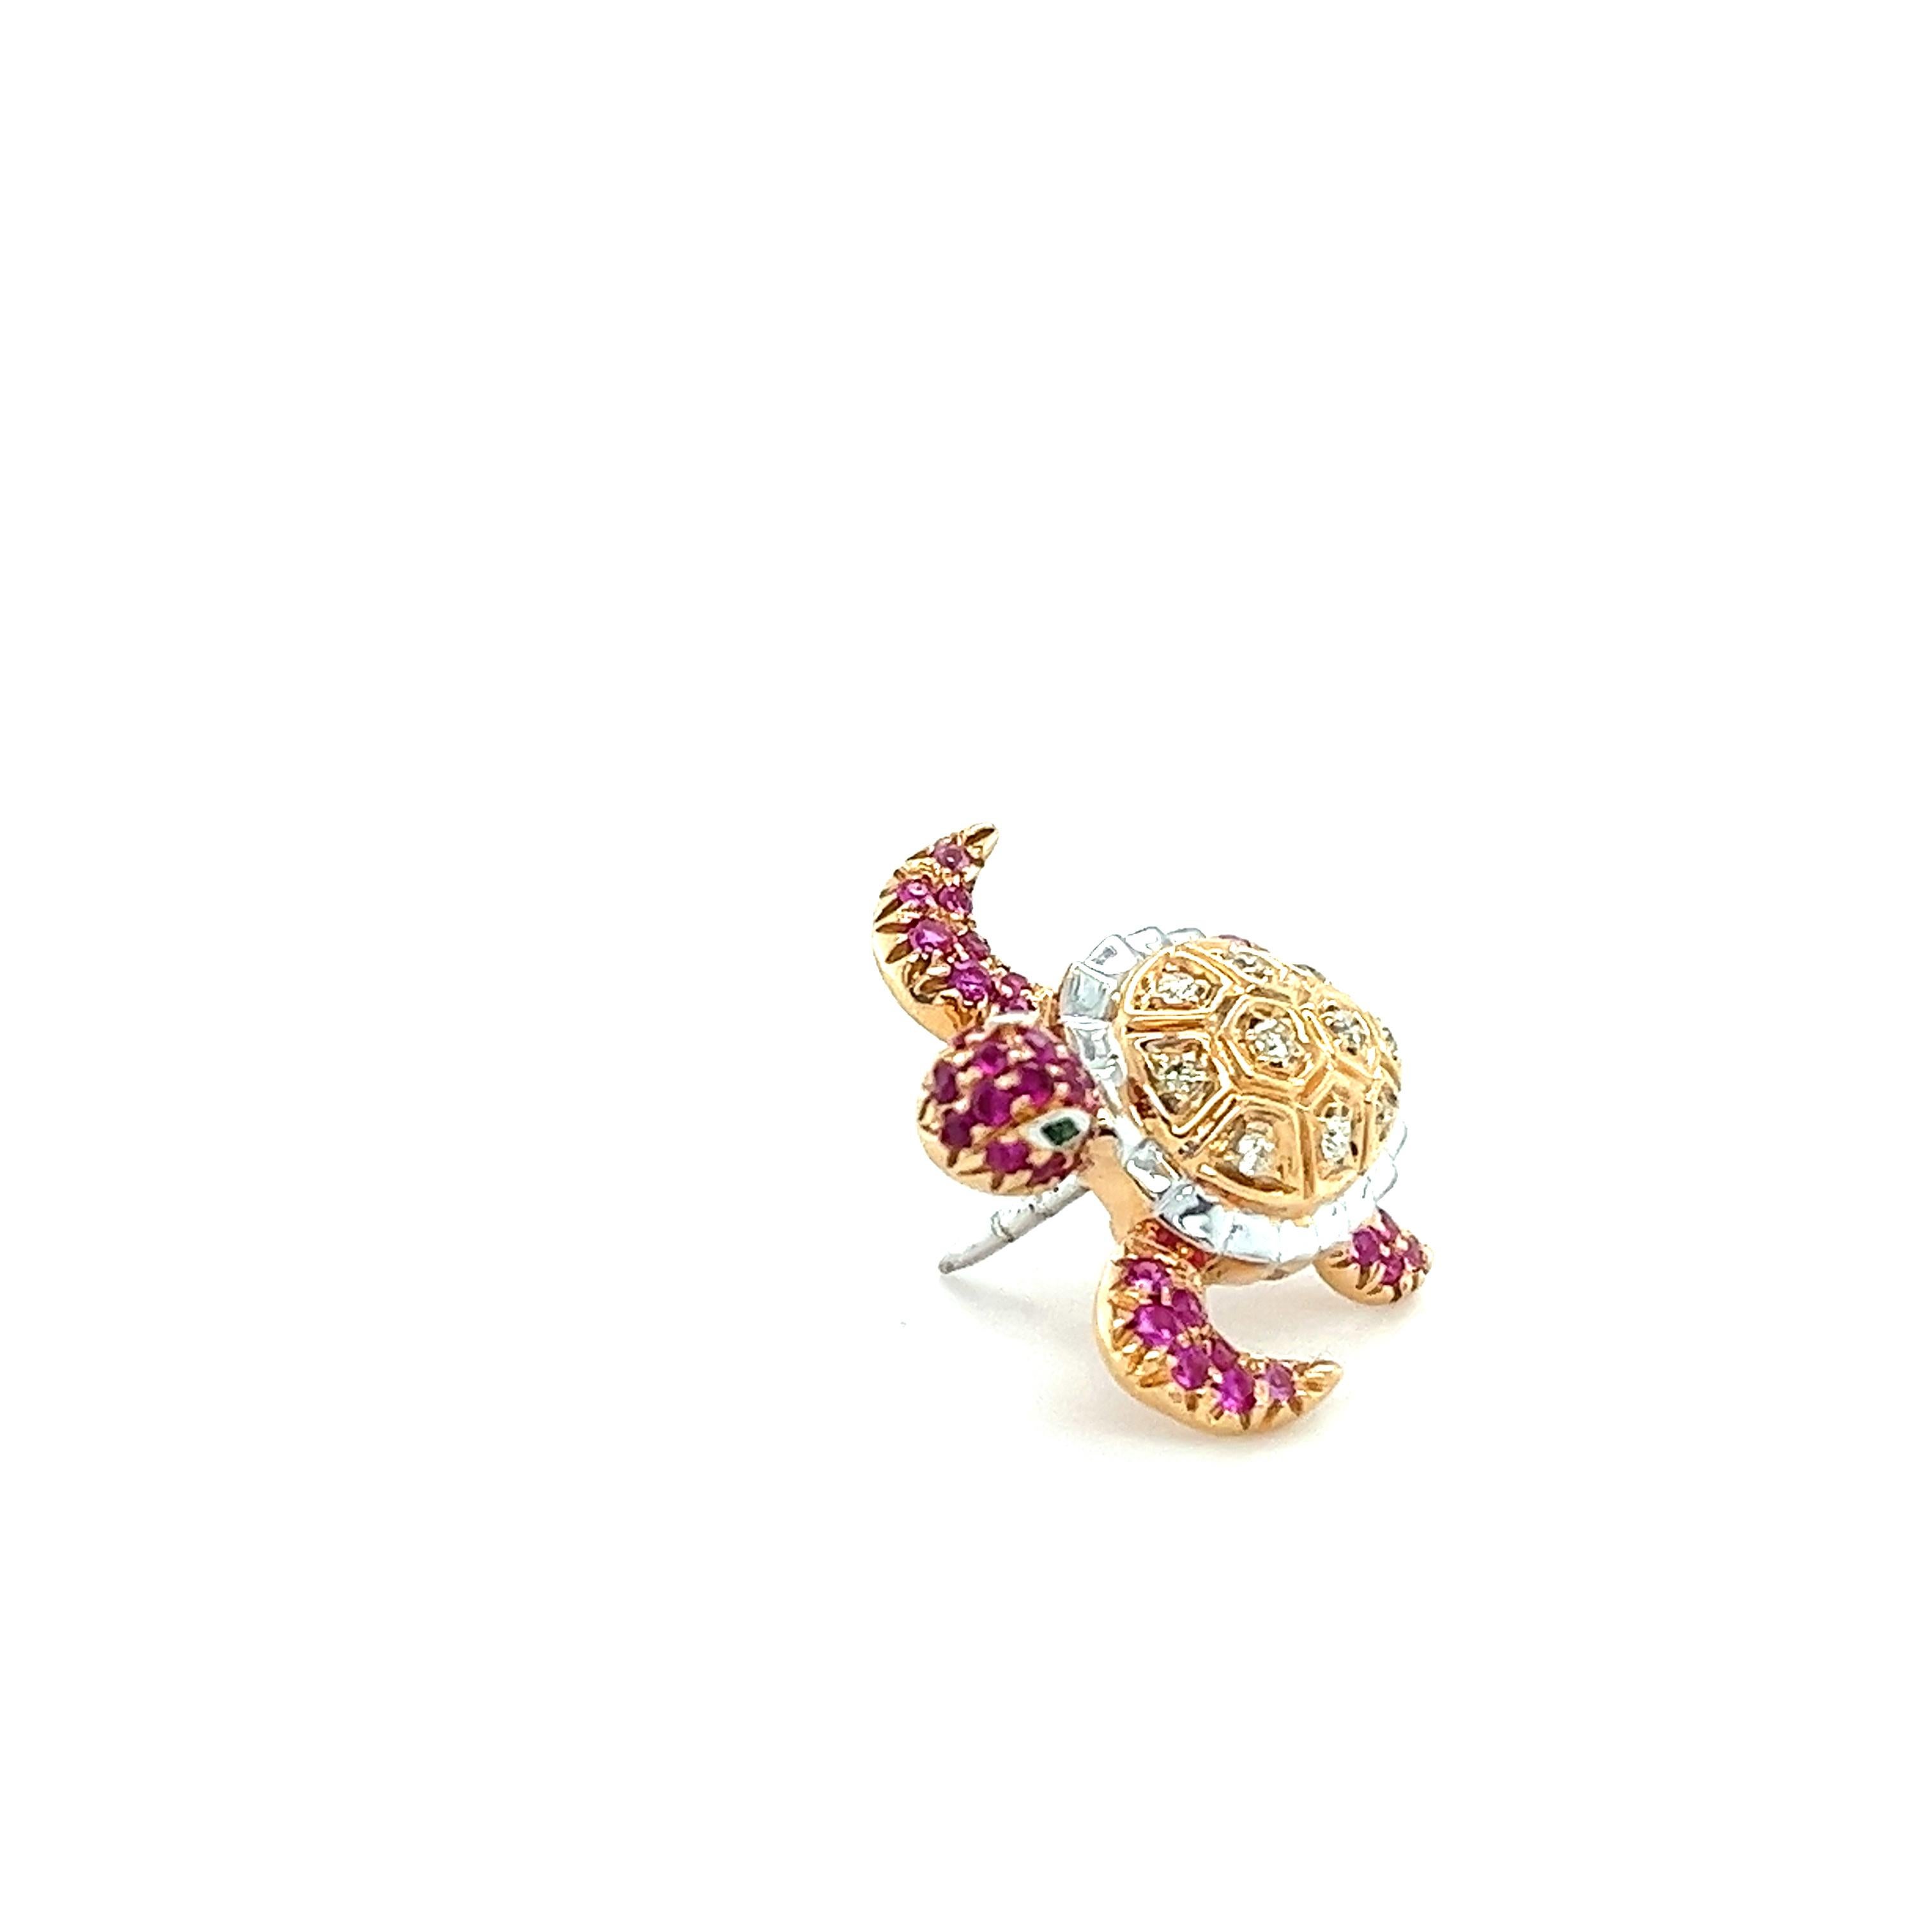 18 K Rose Gold Fancy Diamond & Pink Sapphire Tortoise Brooch

10 Fancy Diamonds 0.08 CT
2 Green Garnet 0.01 CT
23 Pink Sapphire 0.20 CT
21 Rubies 0.16 CT
18 K Rose Gold 3.96 GM

Pink Sapphires have such a loving, nurturing energy that they instantly